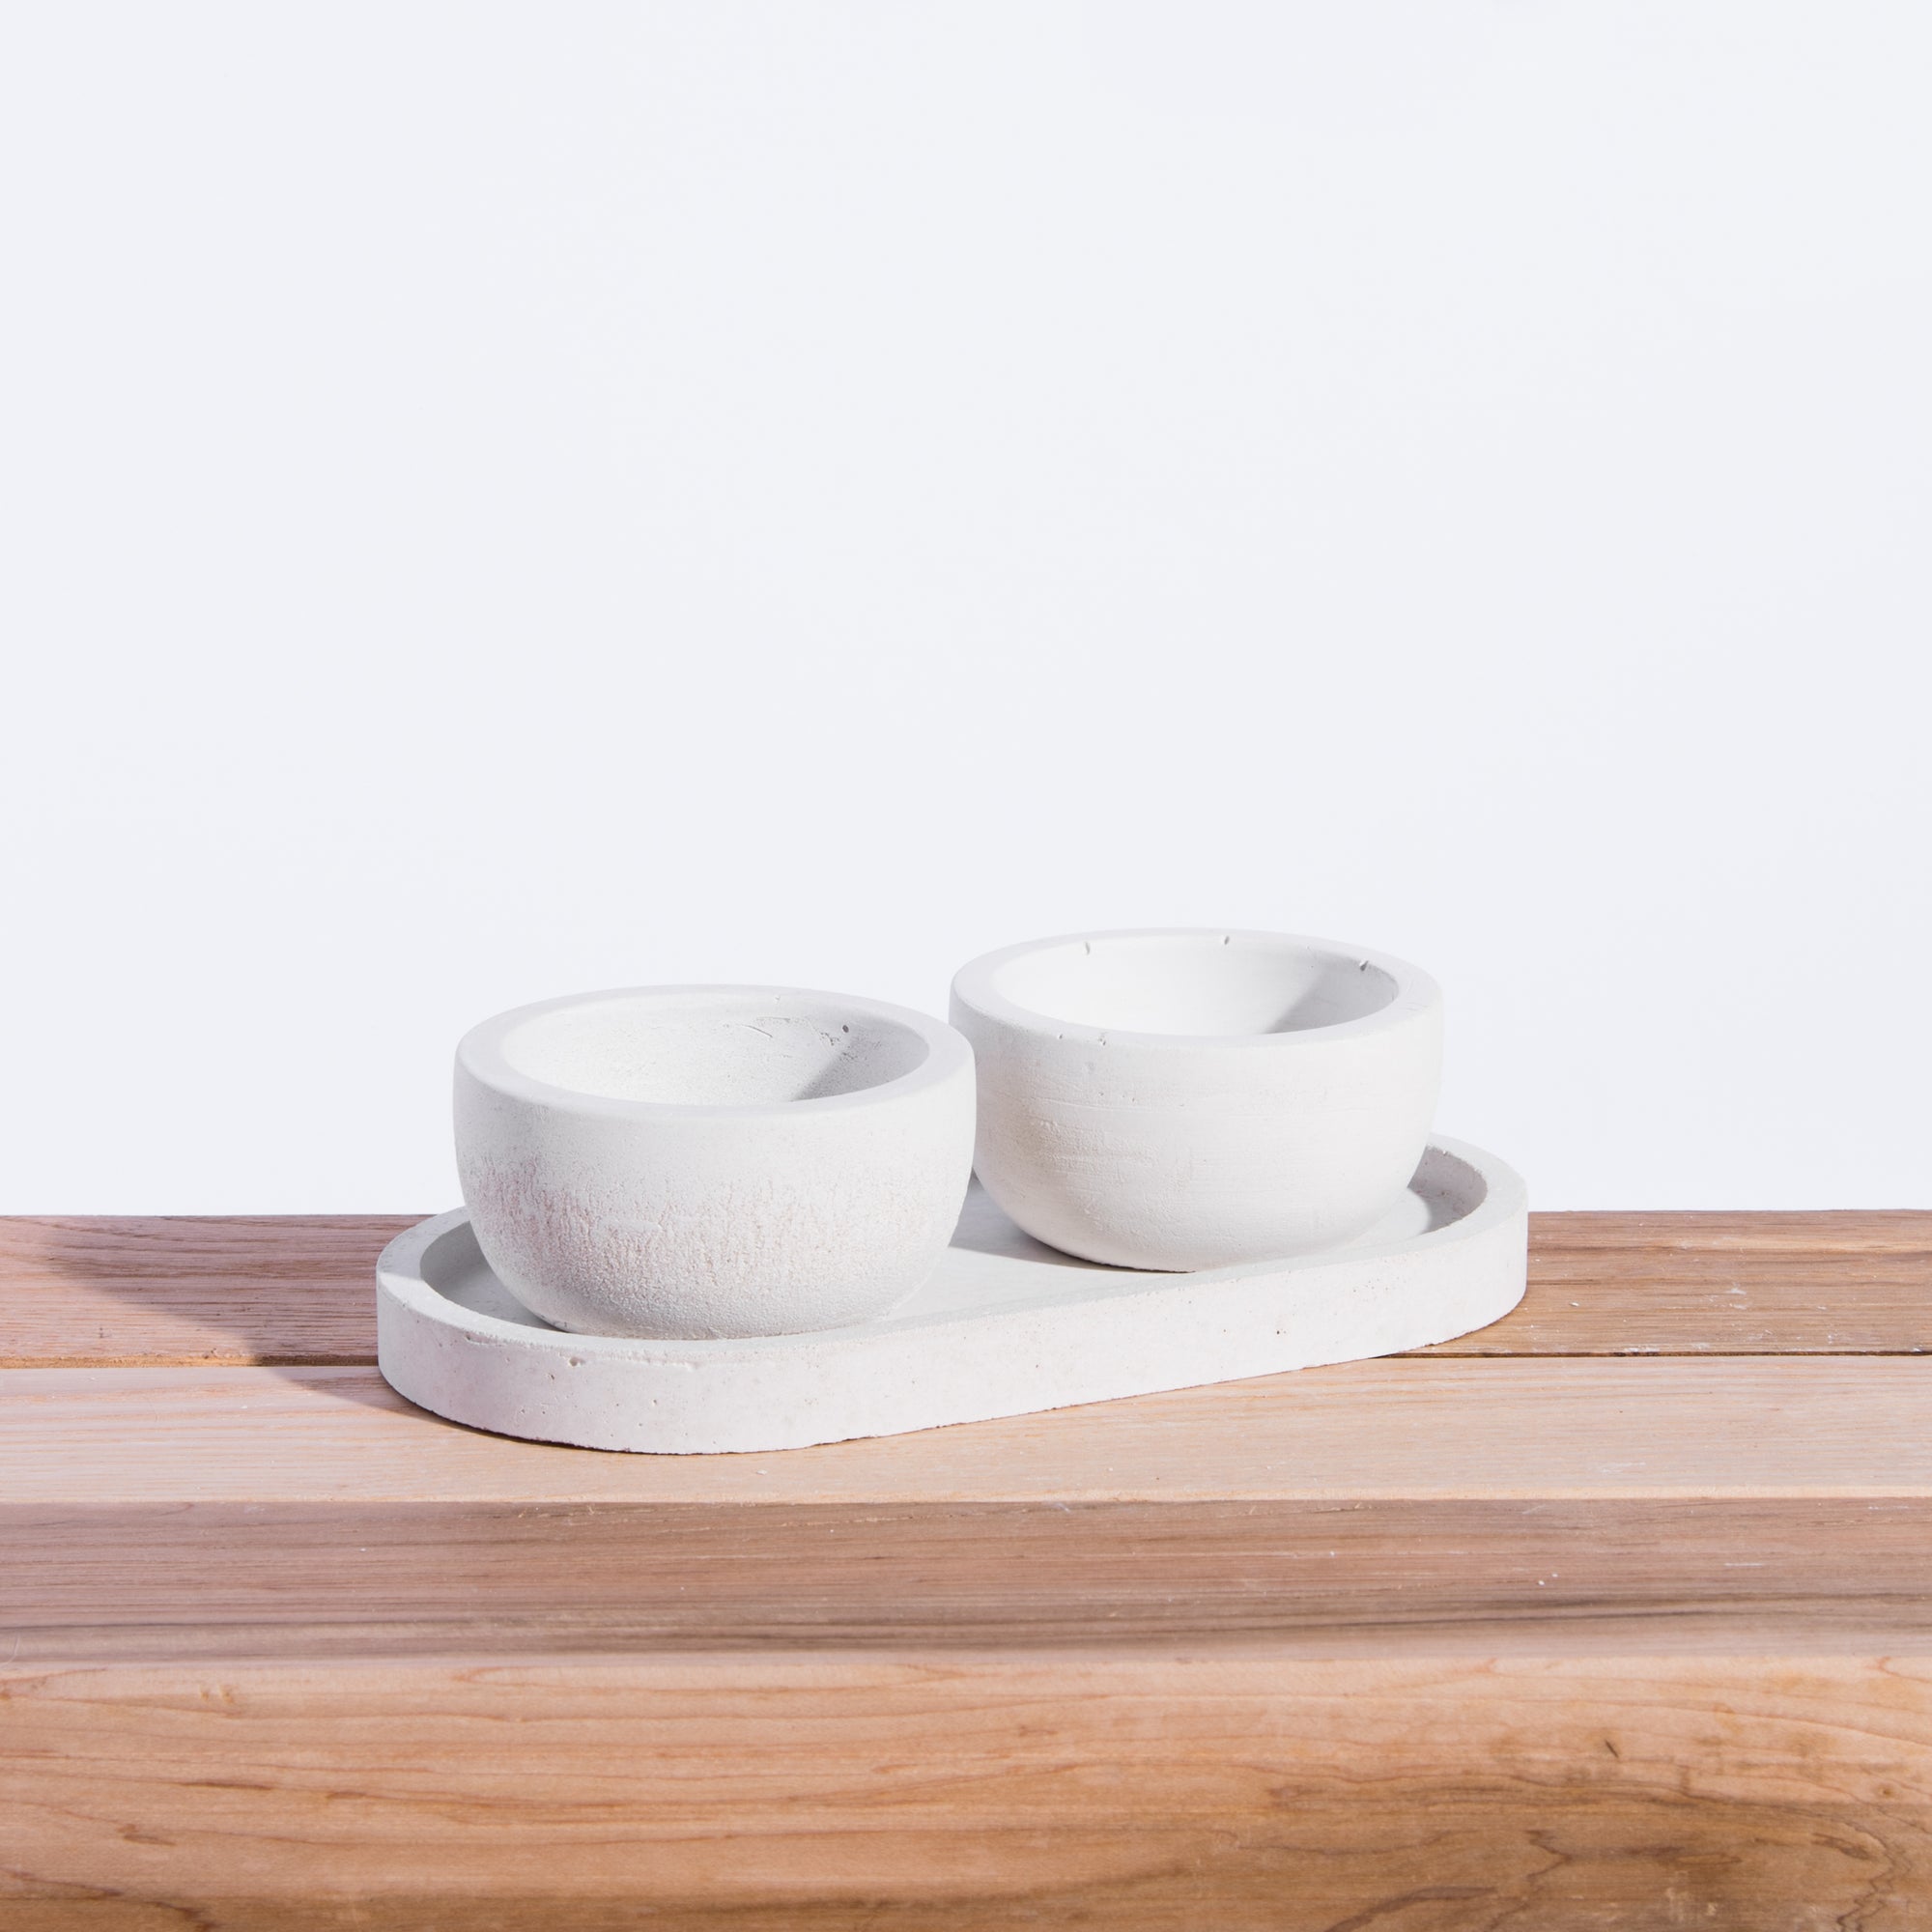 Succulent Concrete Planter Bowl Set of 2 With Saucer. Handcrafted in Toronto, Ontario.